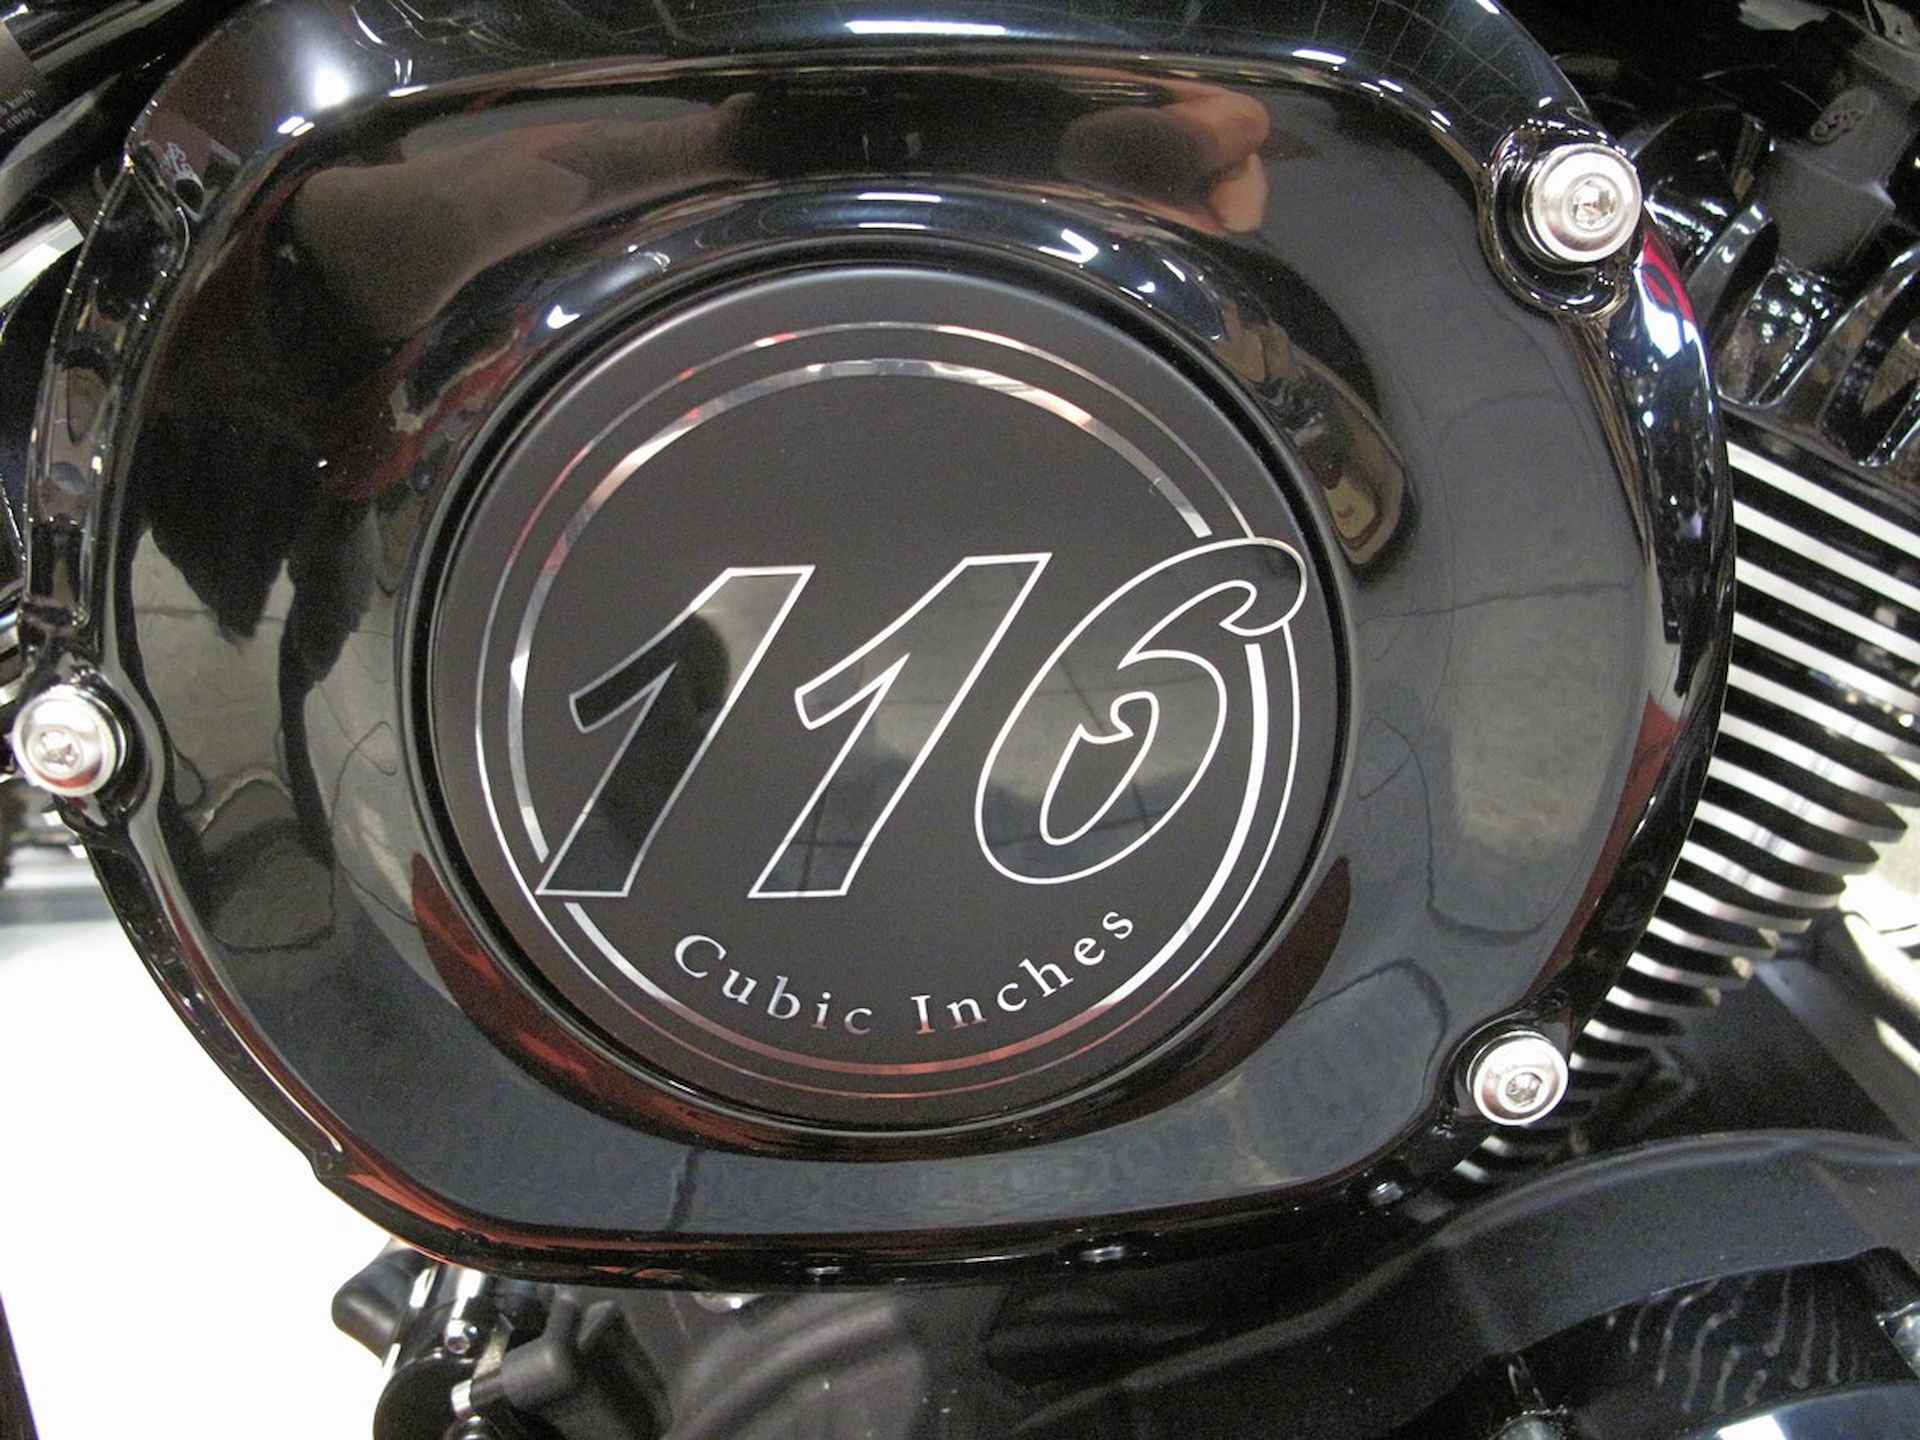 Indian Chief Dark Horse Official Indian Motoercycle Dealer - 7/11